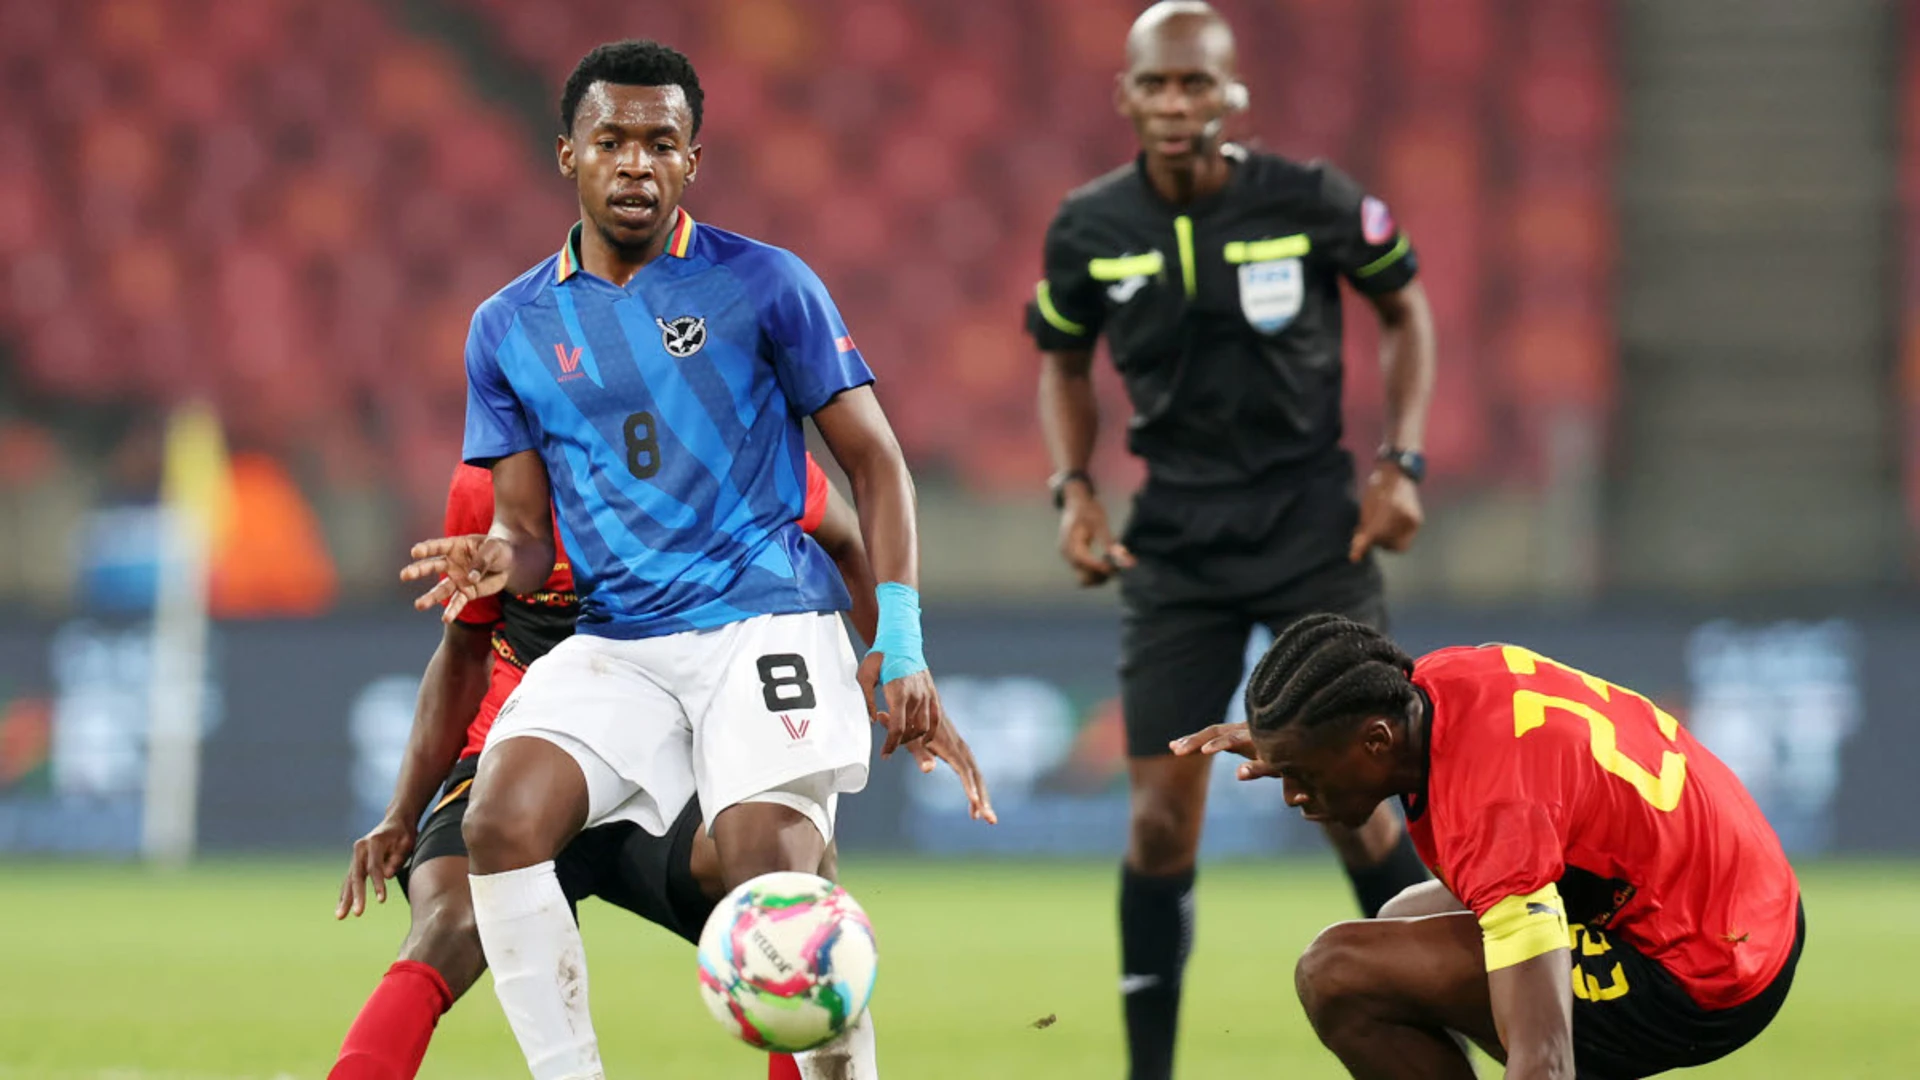 Draws all round in Group C at Cosafa Cup